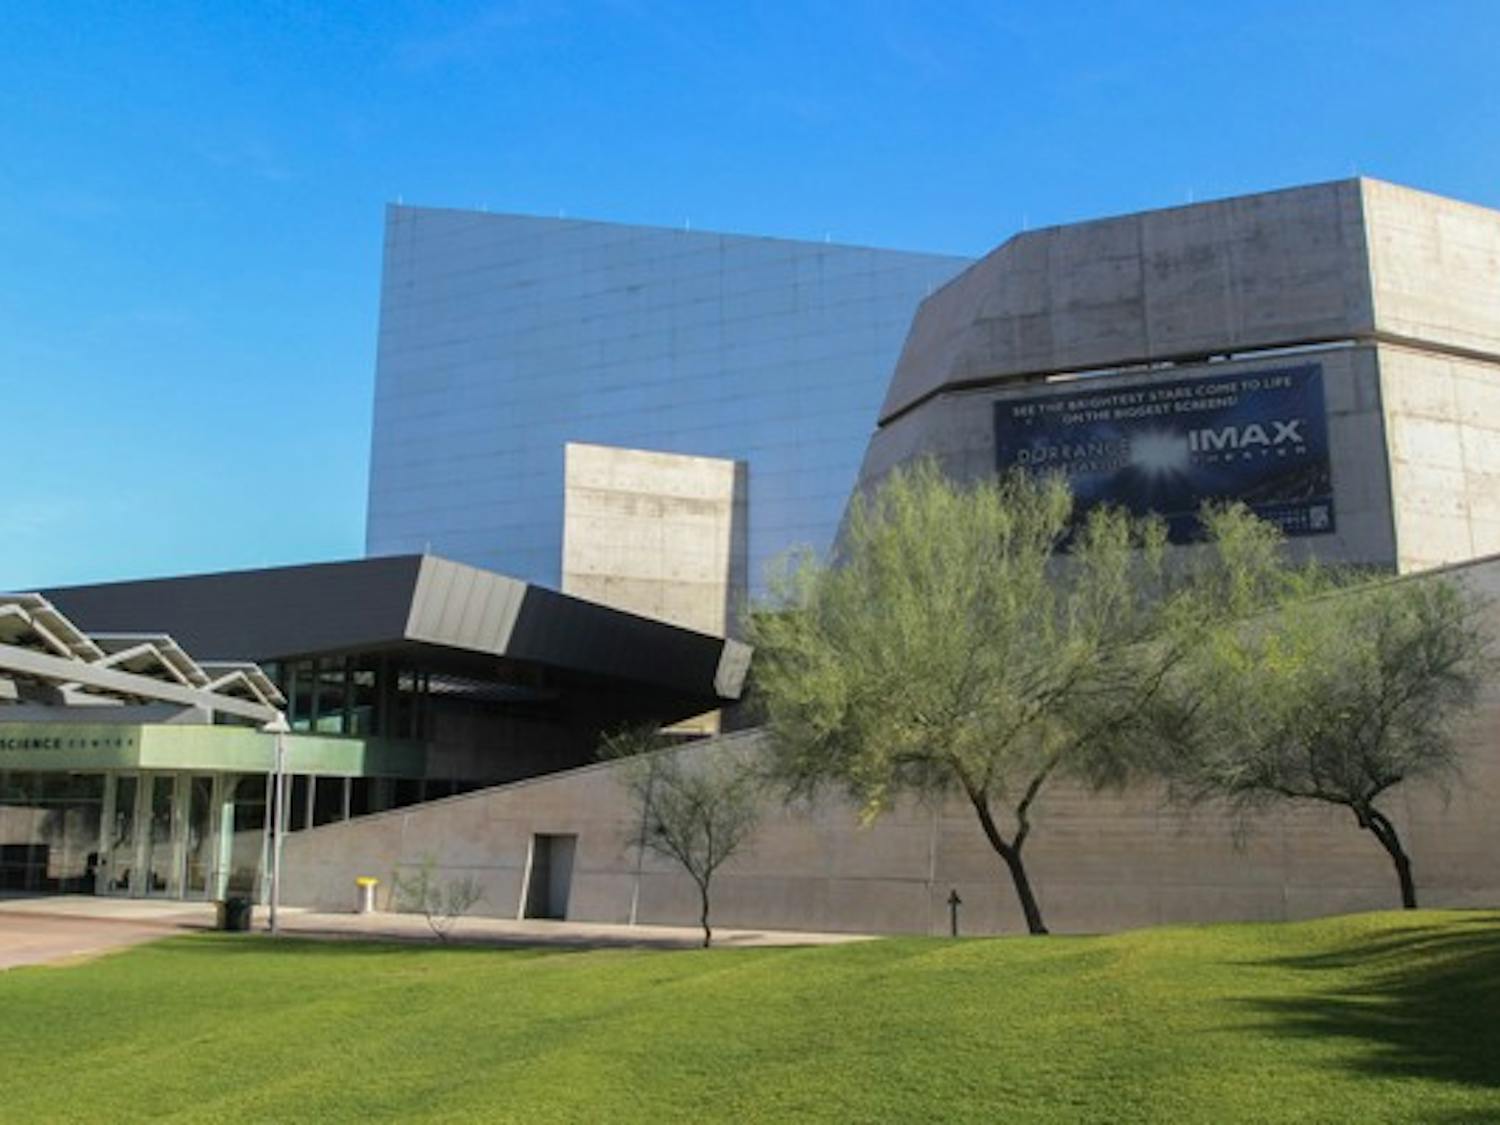 ASU and the Arizona Science Center (pictured) were awarded $30,000 to further their partnership to advance STEM in k-12 schools. This money will also go to help aid writing workshops in the valley. (Photo by Dominic Valente)